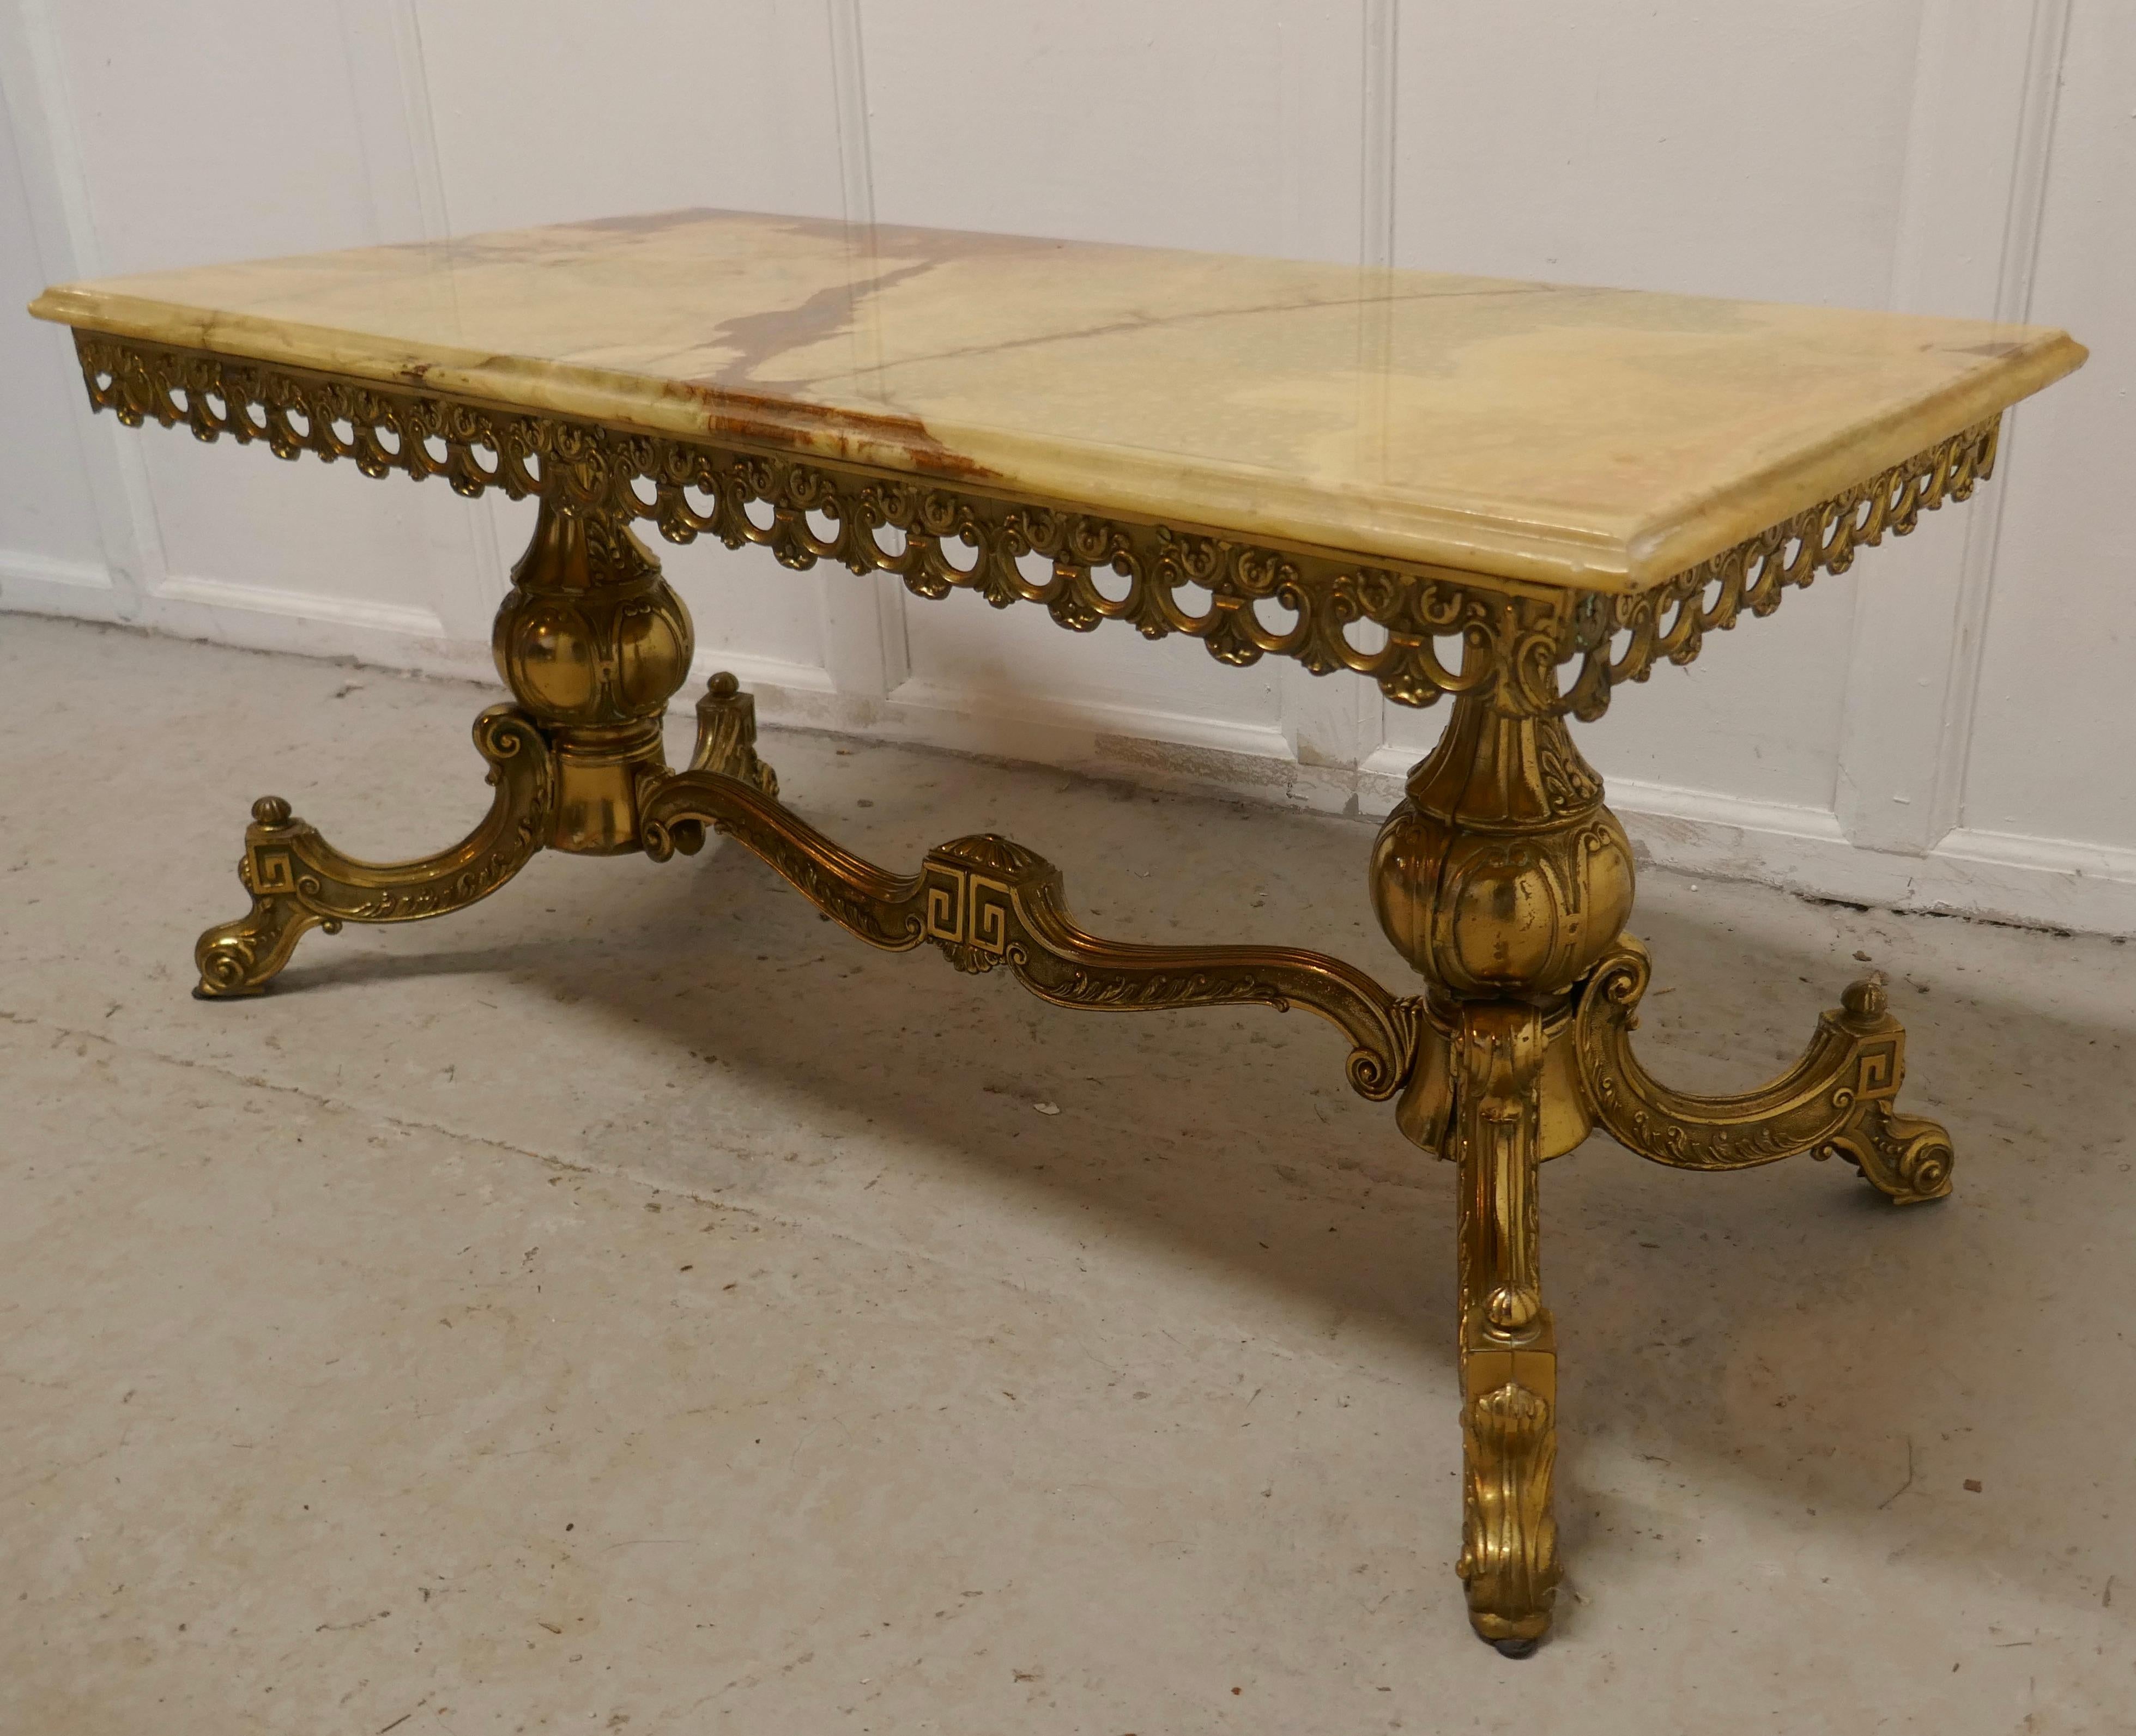 Superb Quality French brass and marble coffee table

This is a very attractive piece the legs are in the Empire style with intricate chased decoration and a waved stretcher

The top has moulded edge and is made in beautifully figured “Jasper